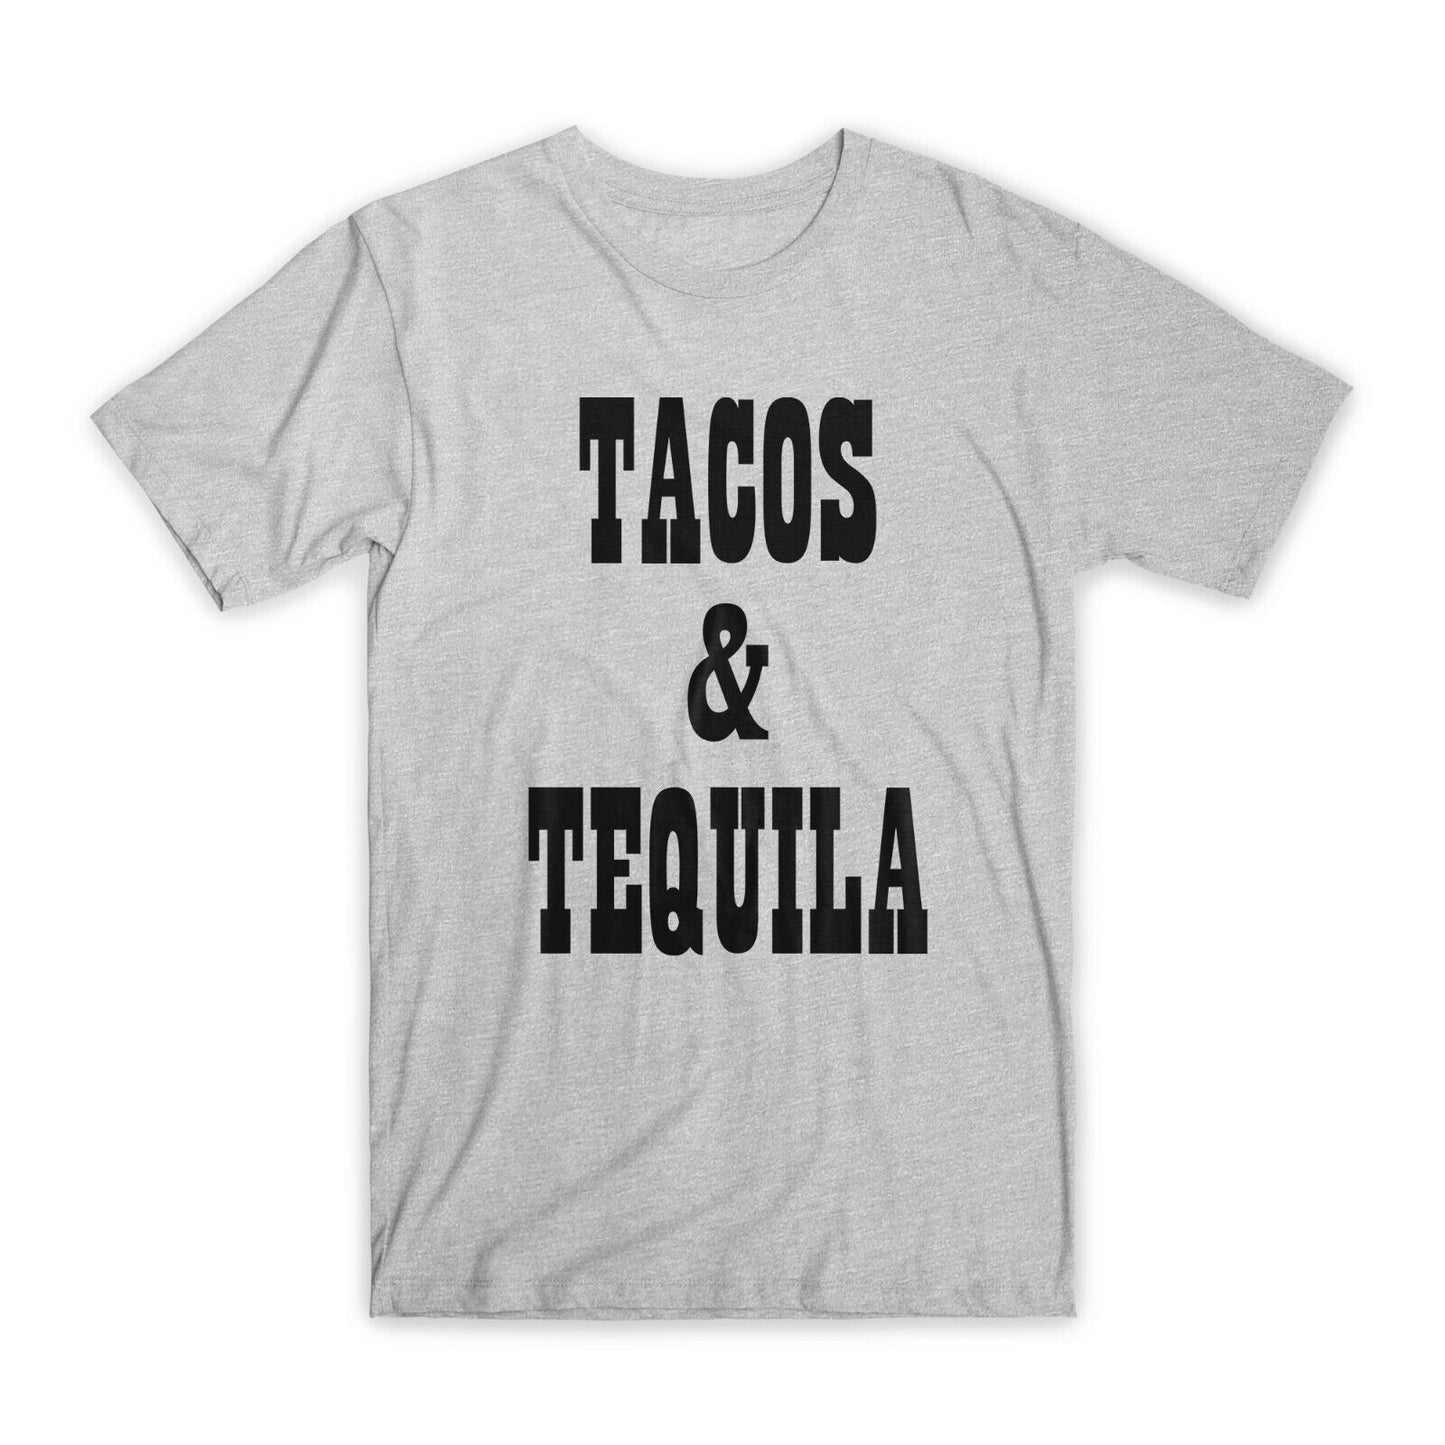 Tacos & Tequila T-Shirt Premium Soft Cotton Crew Neck Funny Tee Novelty Gift NEW